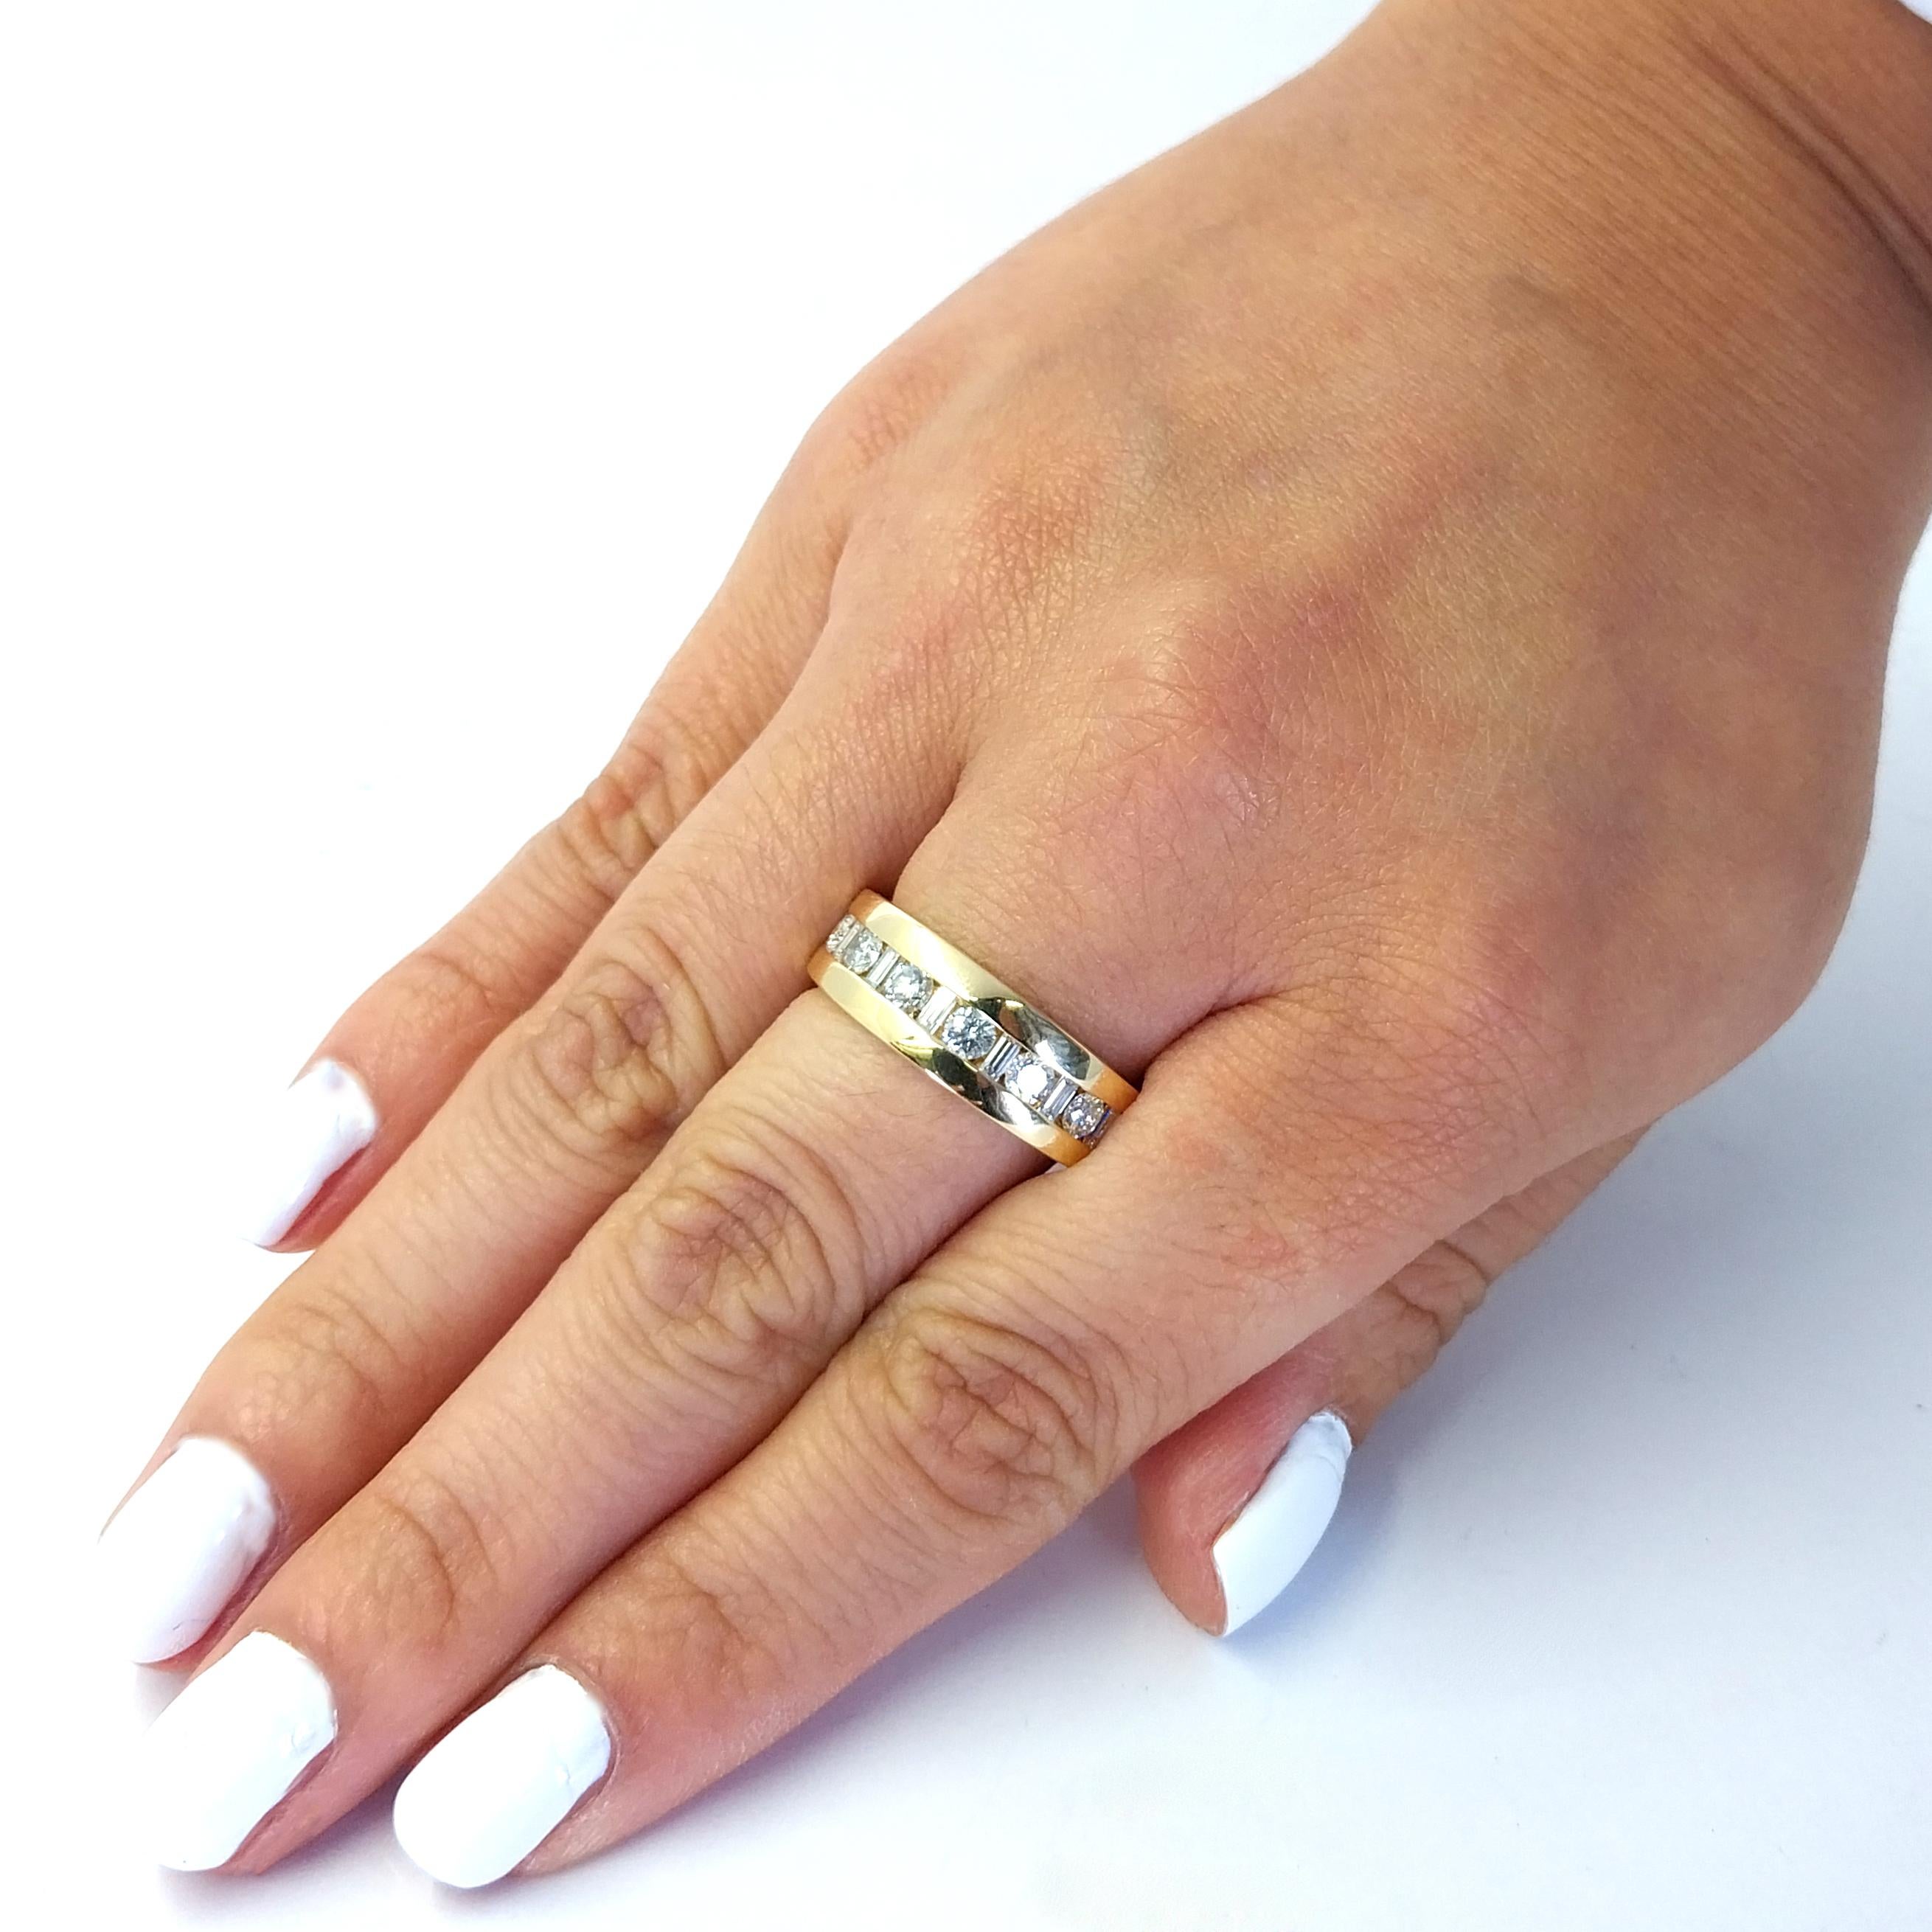 18 Karat Yellow Gold Channel Band Featuring 13 Alternating Round Brilliant and Baguette Cut Diamonds of SI Clarity and H Color Totaling Approximately 1.00 Carat. Finger Size 8. Purchase Includes One Sizing Service, Upon Request. Finished Weight is